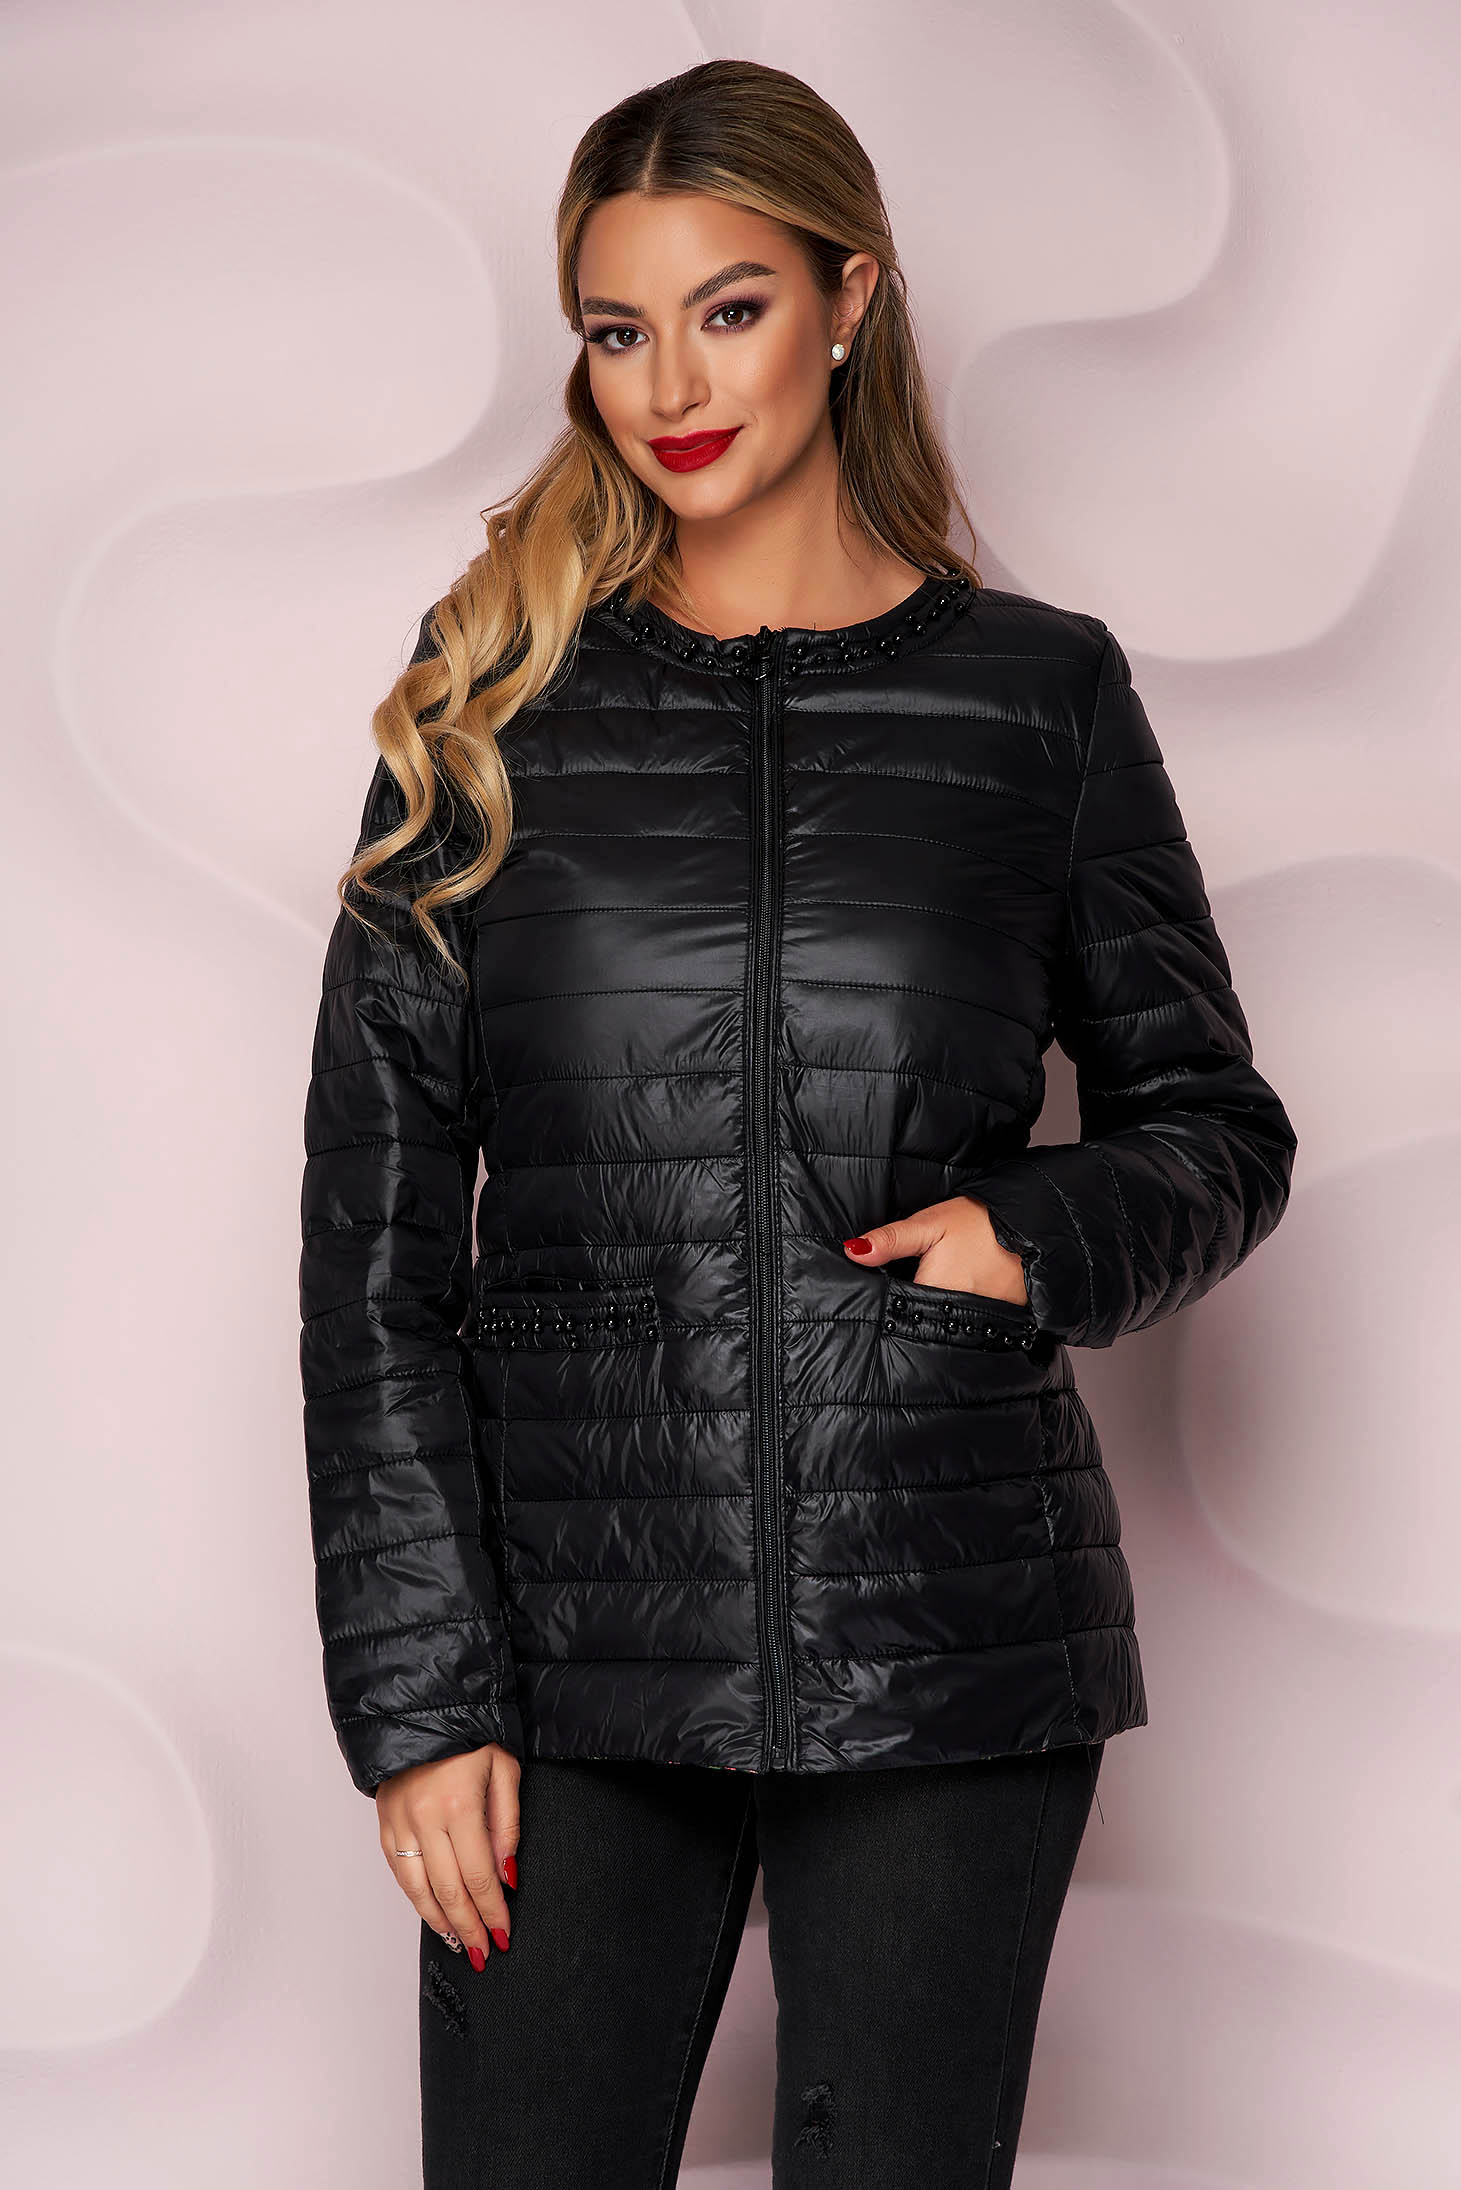 Black jacket from slicker thin fabric with pearls straight